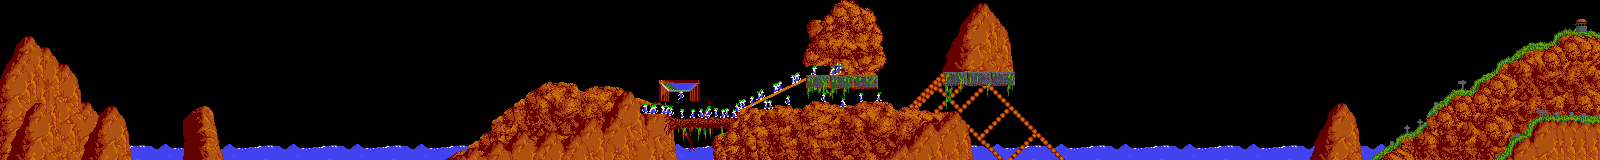 Overview: Lemmings, Amiga, Tricky, 28 - Lost something?